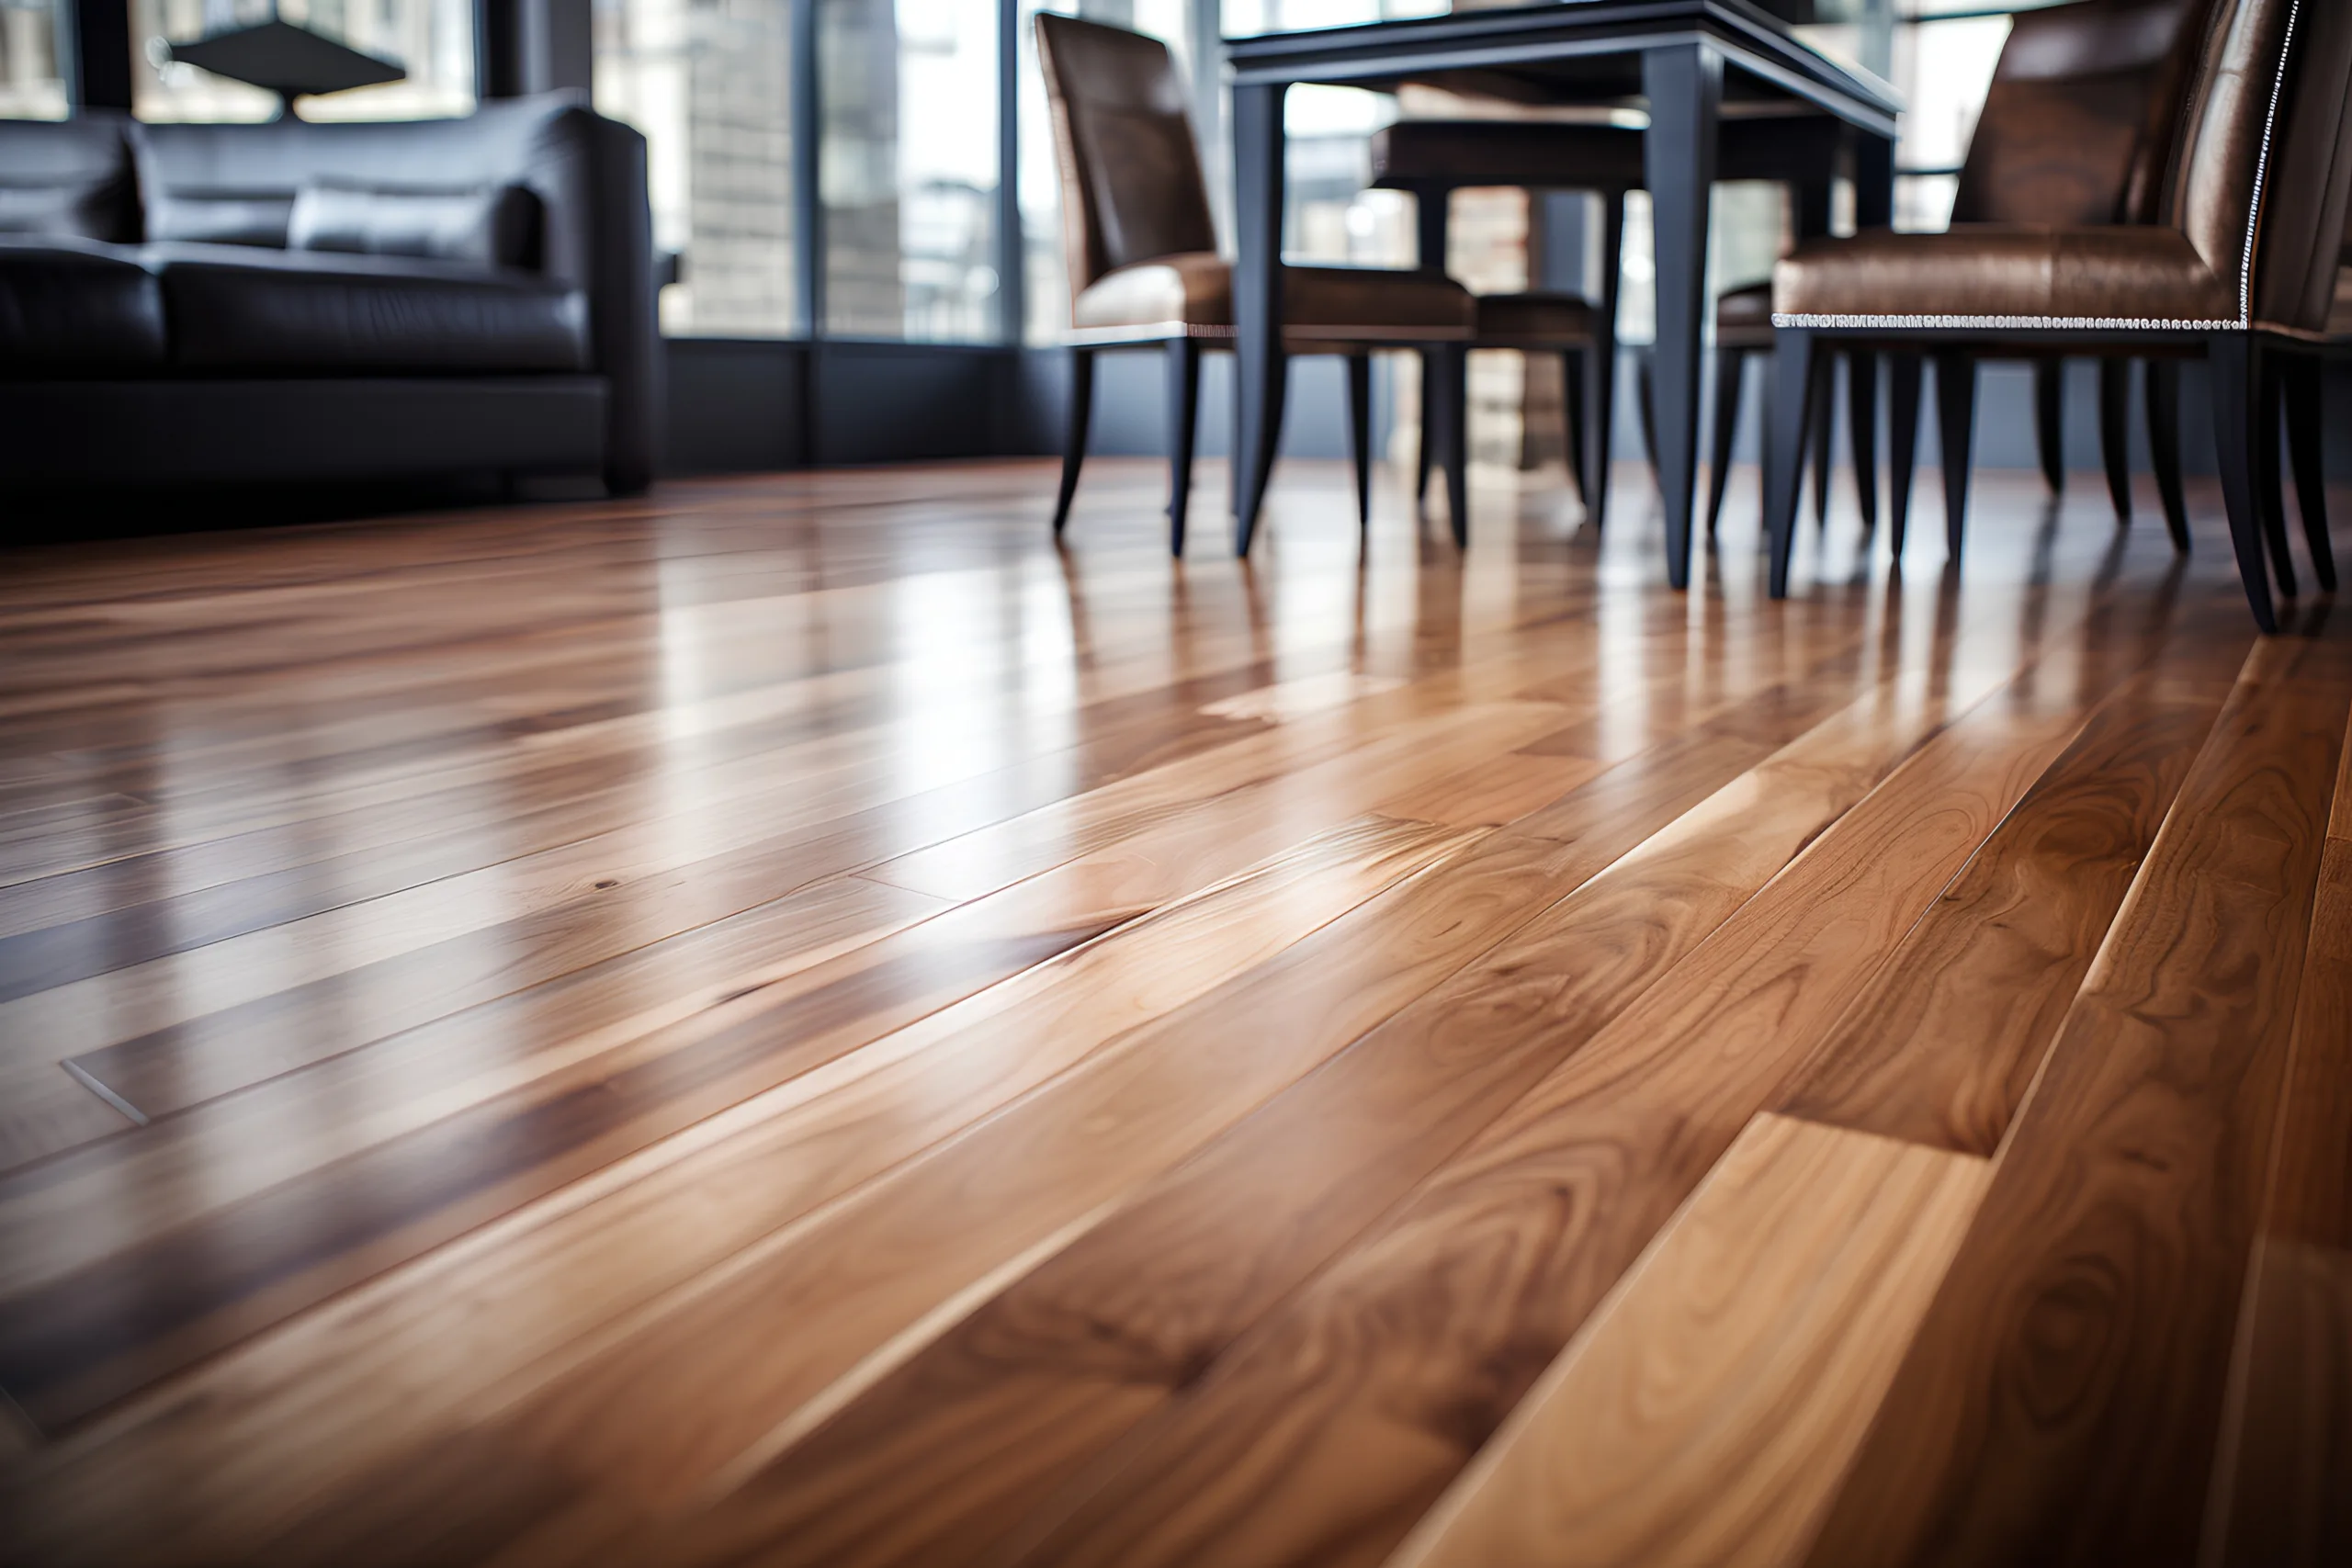 Common mistakes to avoid when installing or maintaining your wood flooring